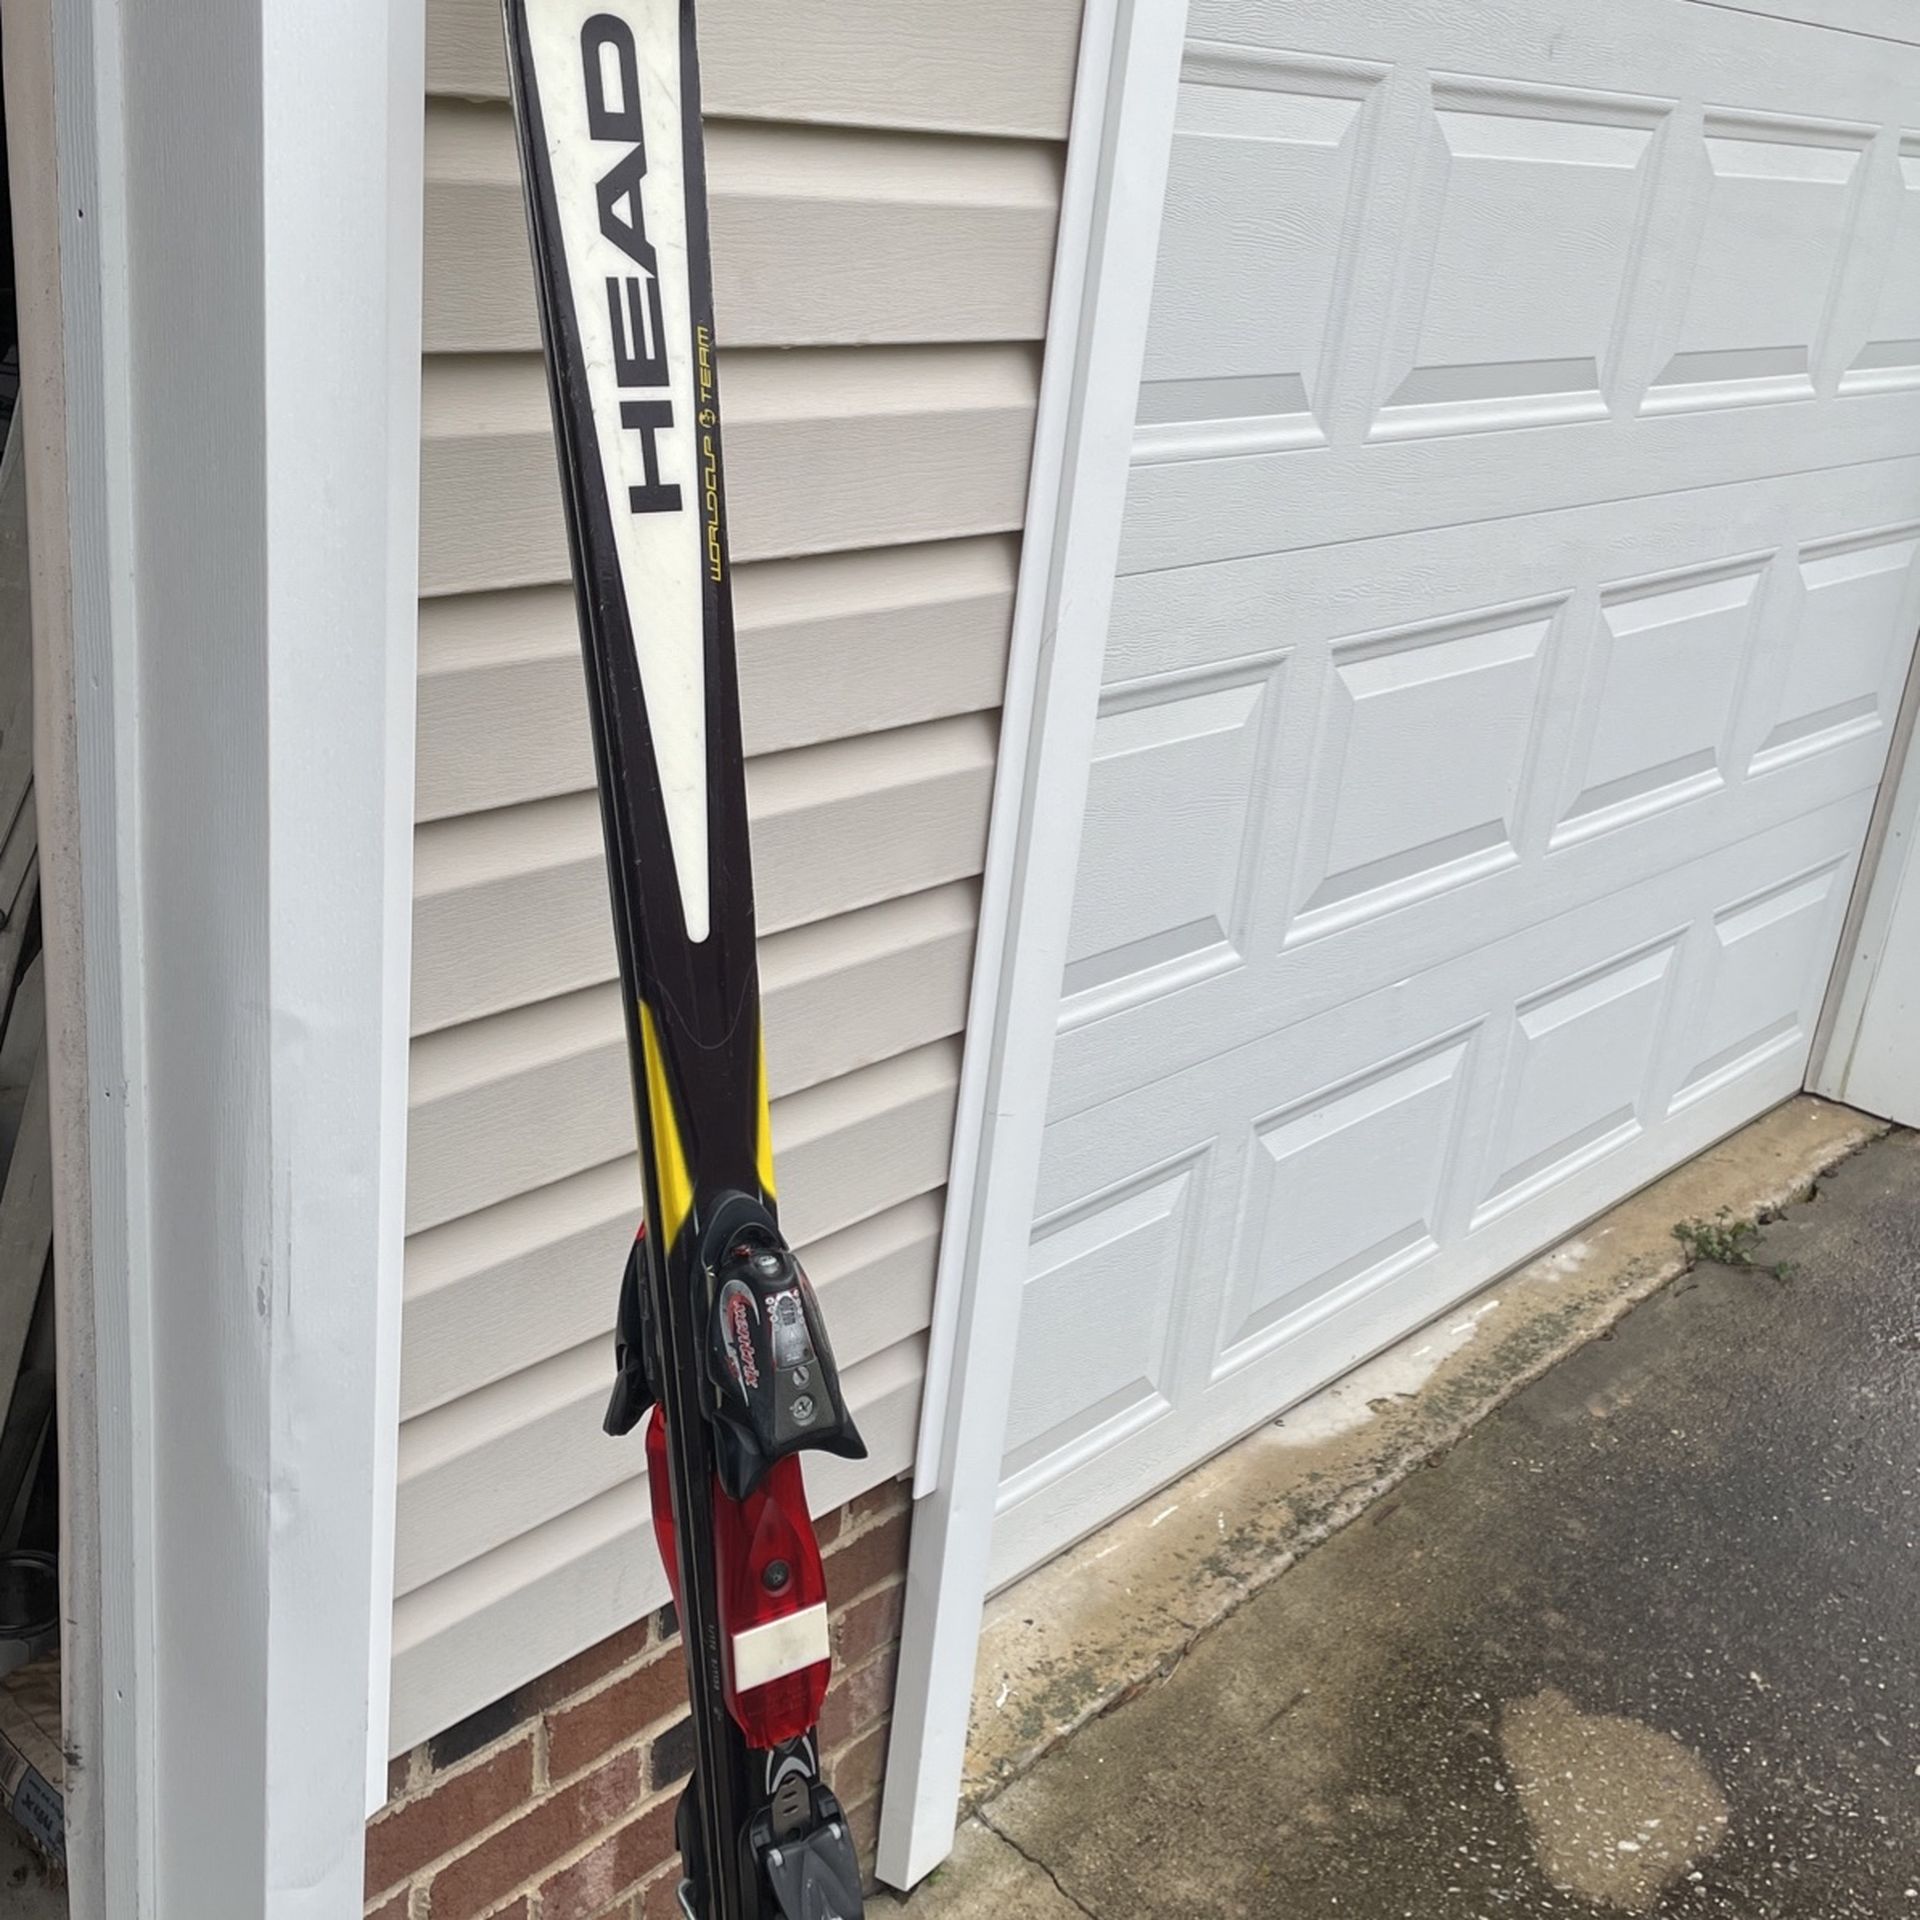 Skis For Sale 170’ Asking $80